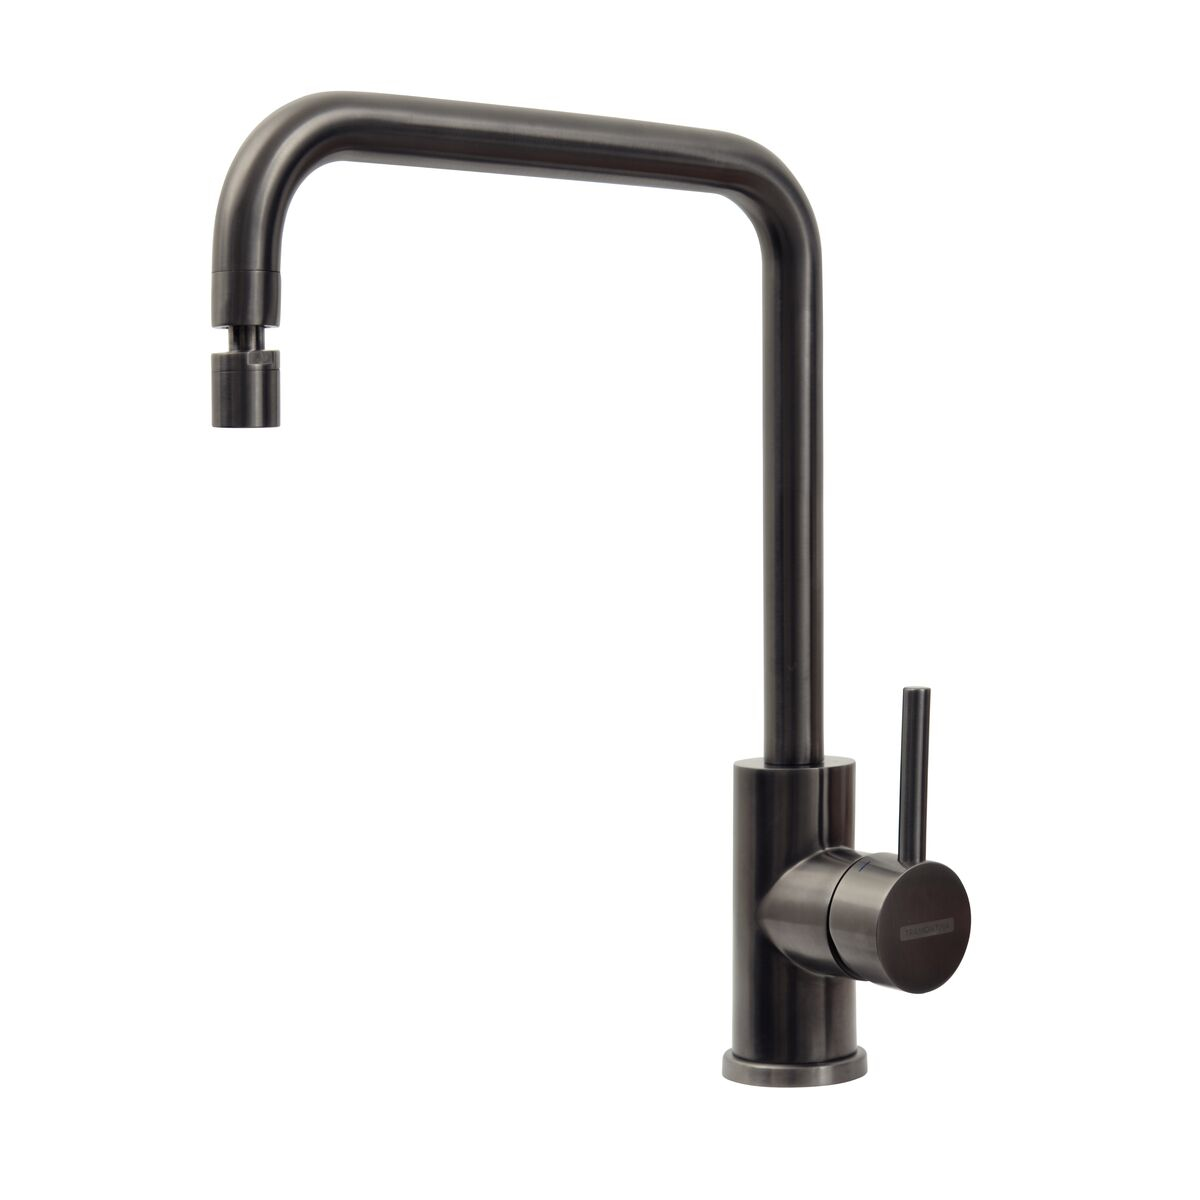 Tramontina Angolare stainless steel mixer faucet with articulated spout and PVD black coating